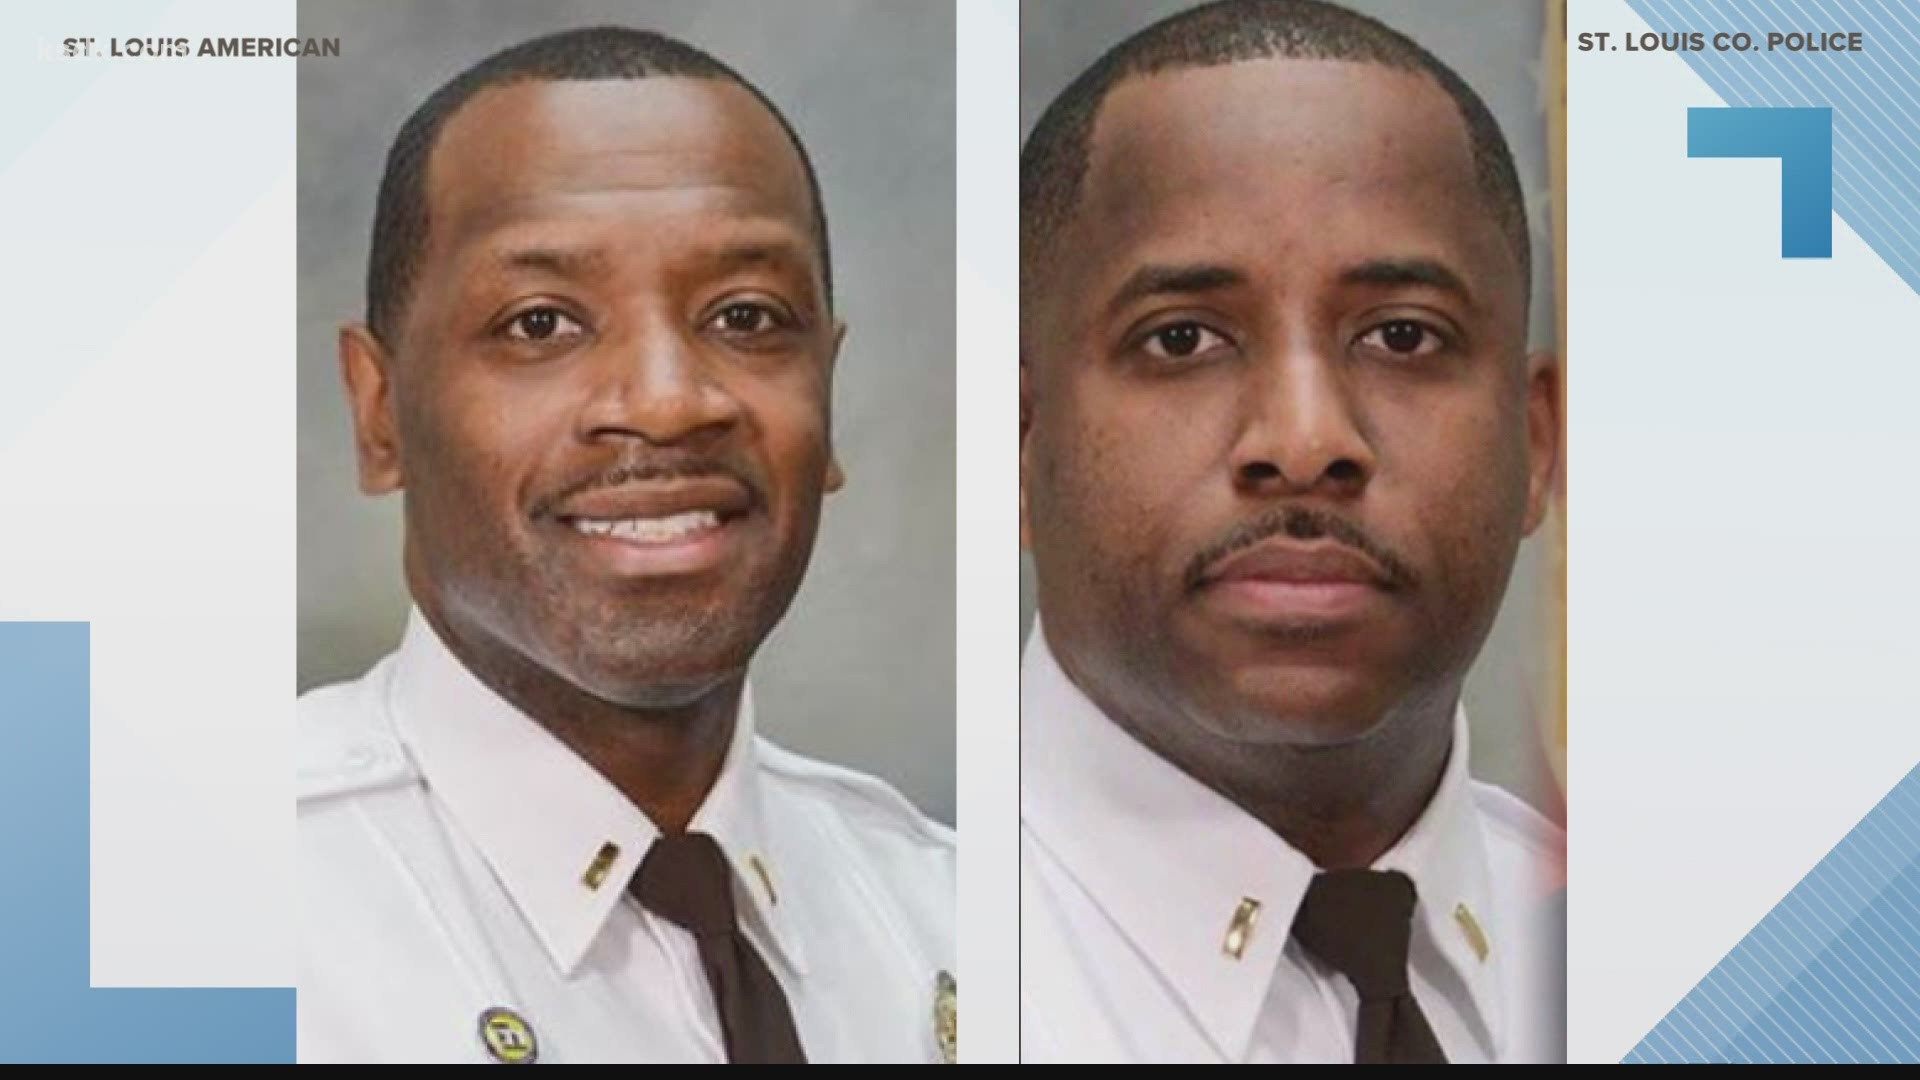 So far this year, three Black police commanders have filed discrimination lawsuits against the department